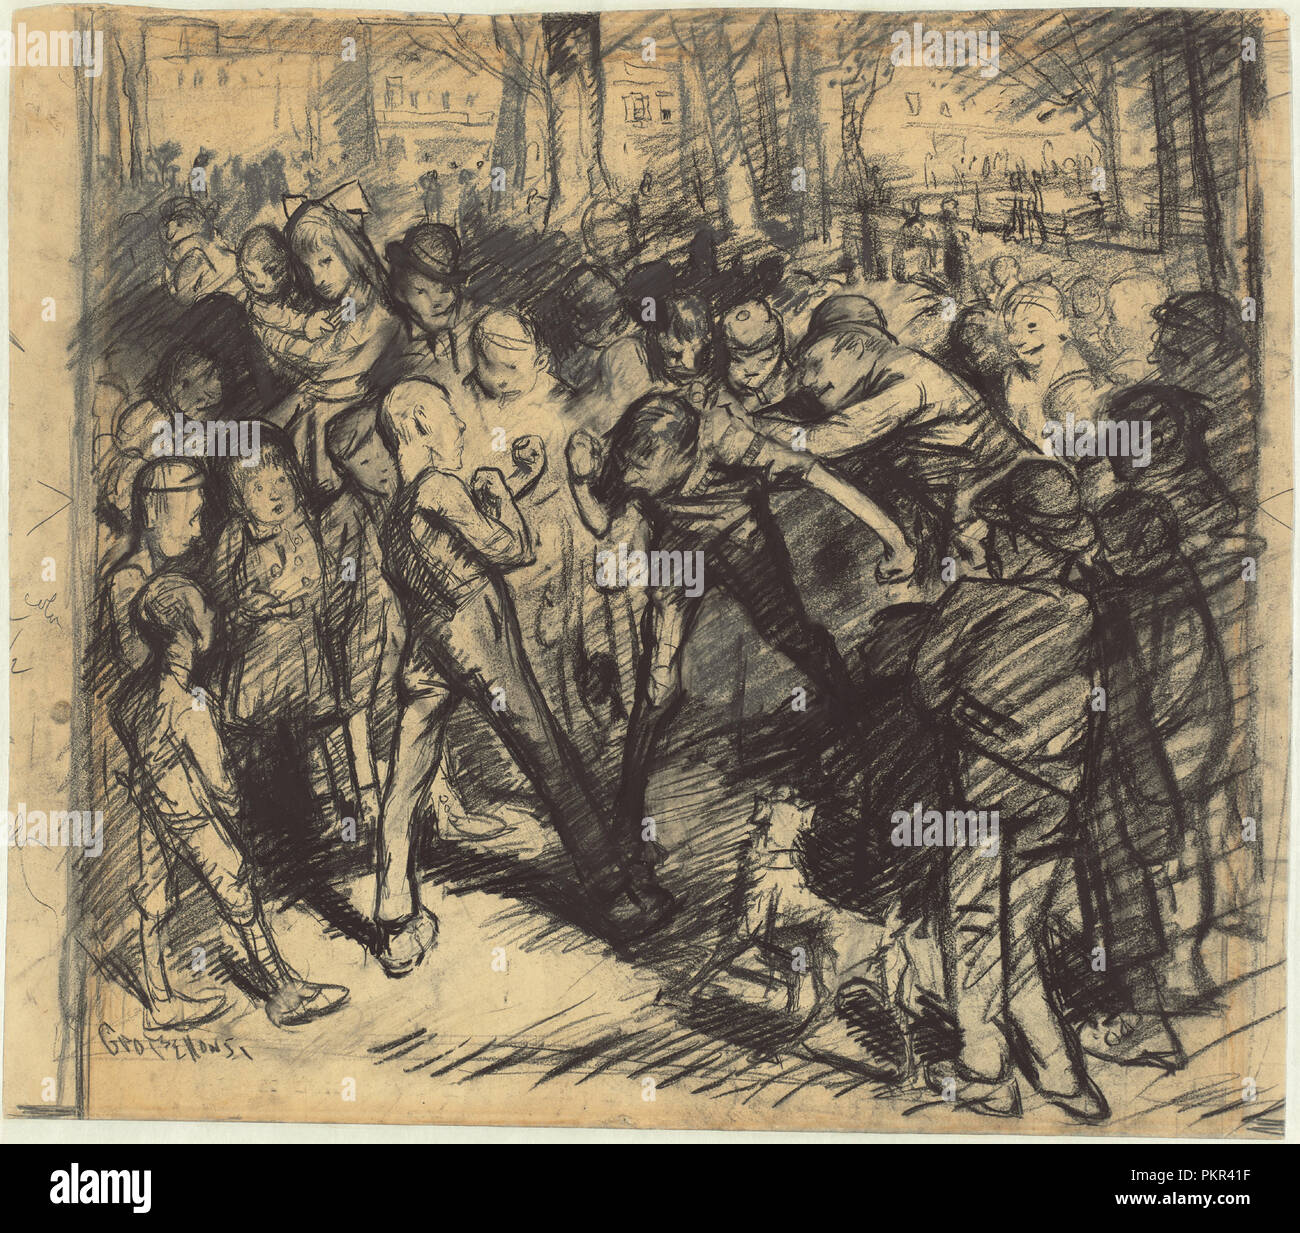 Street Fight [recto]. Dated: 1907. Dimensions: image: 54.61 × 61.91 cm (21 1/2 × 24 3/8 in.)  framed: 73 x 82.5 x 4.5 cm (28 3/4 x 32 1/2 x 1 3/4 in.). Medium: conté crayon, pastel, graphite, and brush and black ink on wove paper. Museum: National Gallery of Art, Washington DC. Author: George Bellows. Stock Photo